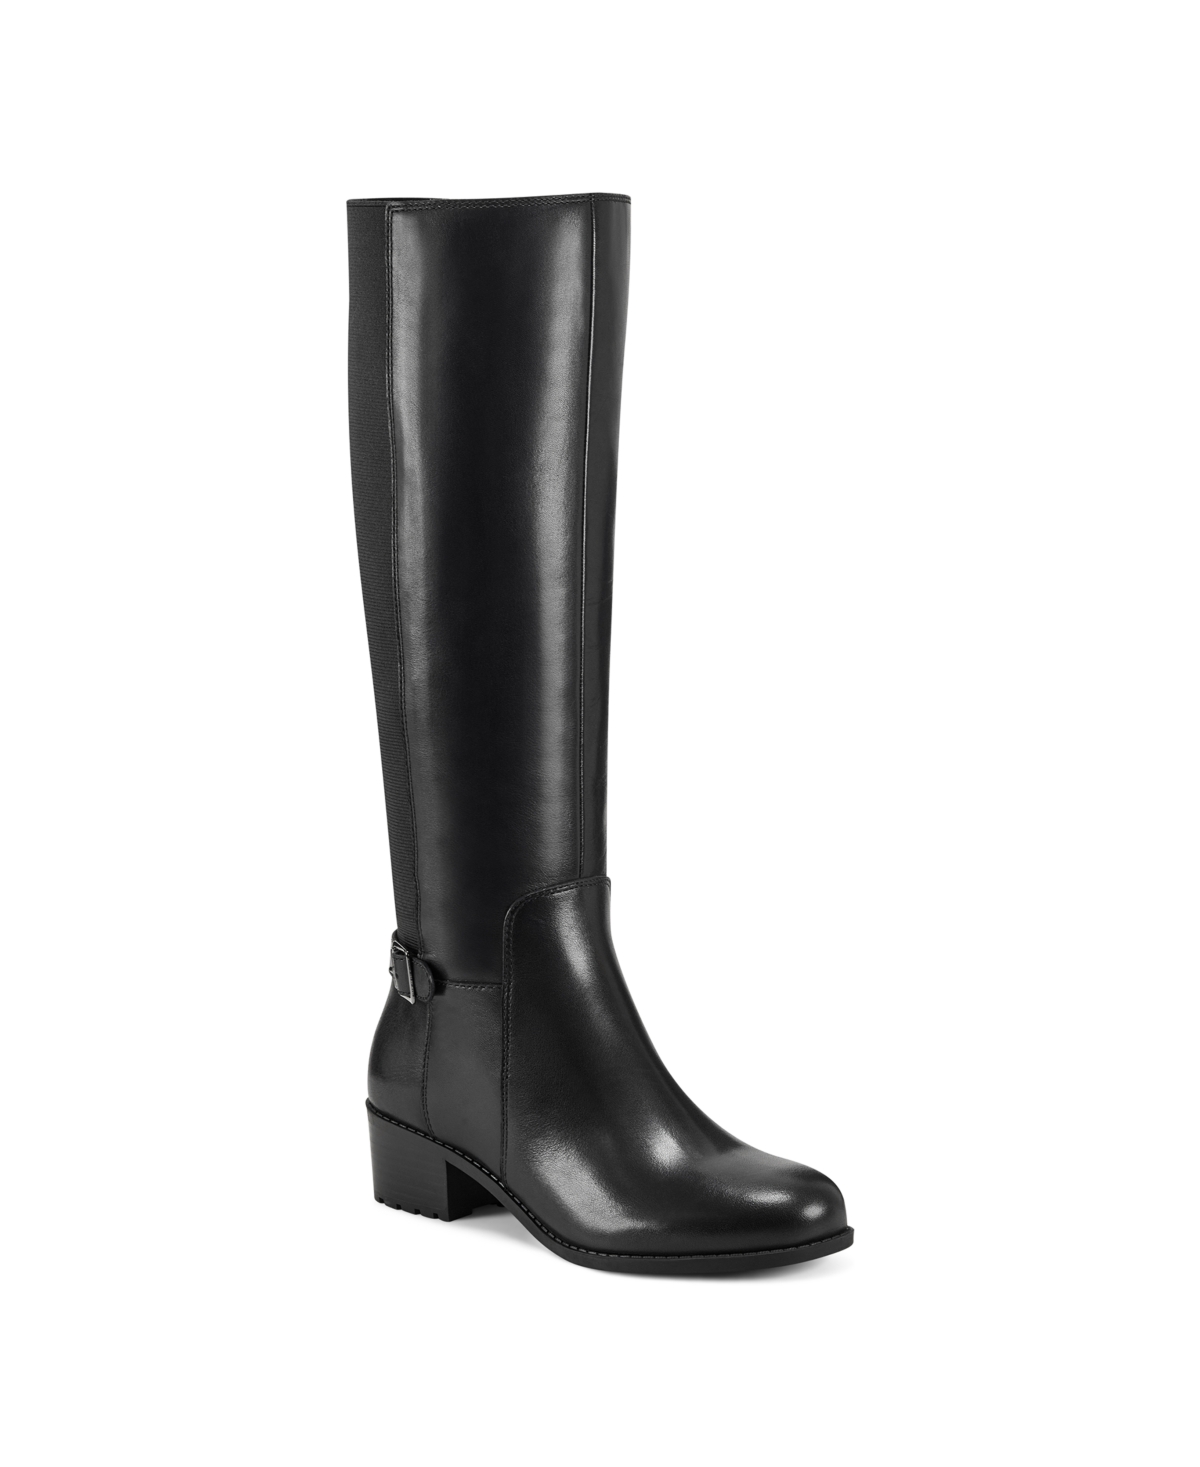 UPC 195608202304 product image for Easy Spirit Women's Chaza Tall Regular Calf Boots Women's Shoes | upcitemdb.com